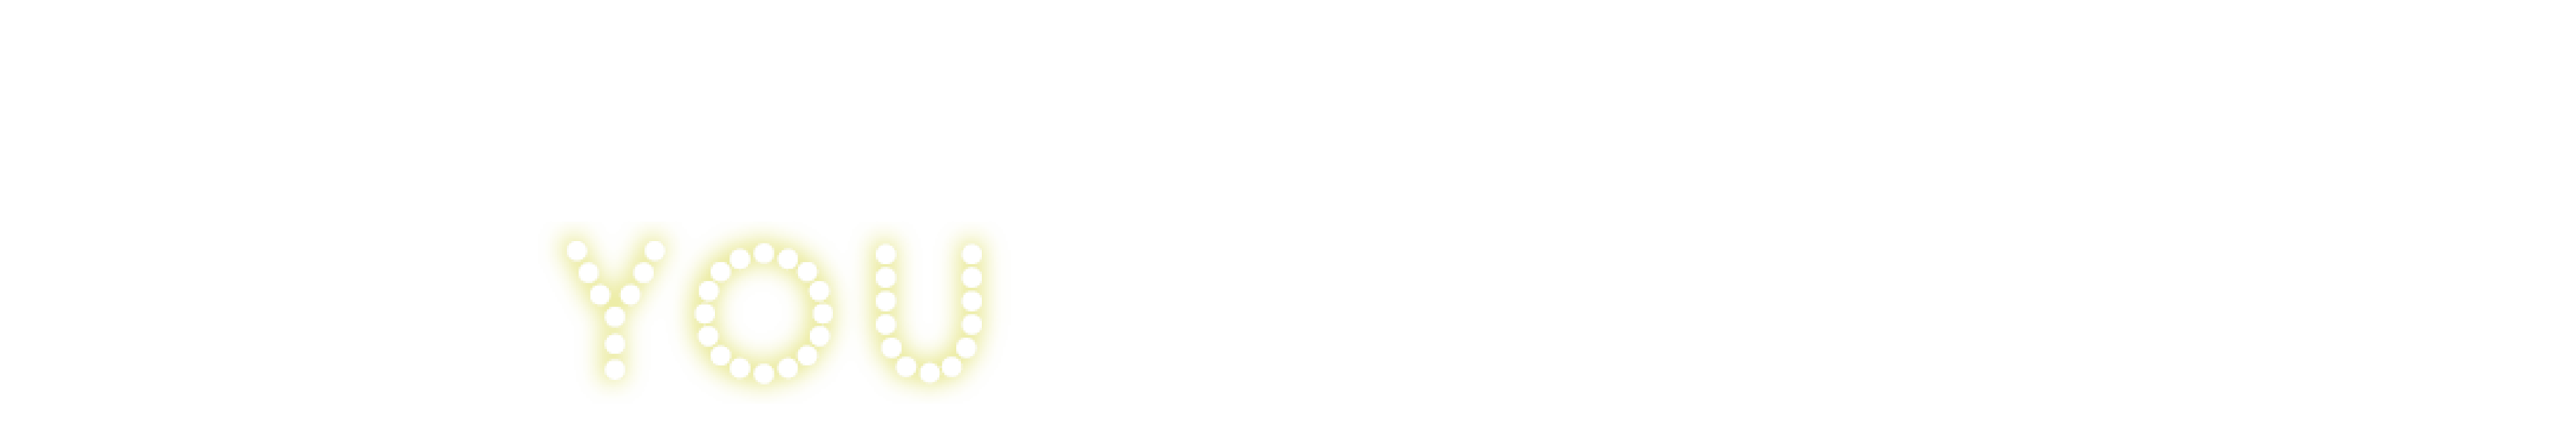 TEXT: When all seems dark and lost, YOU can light the way